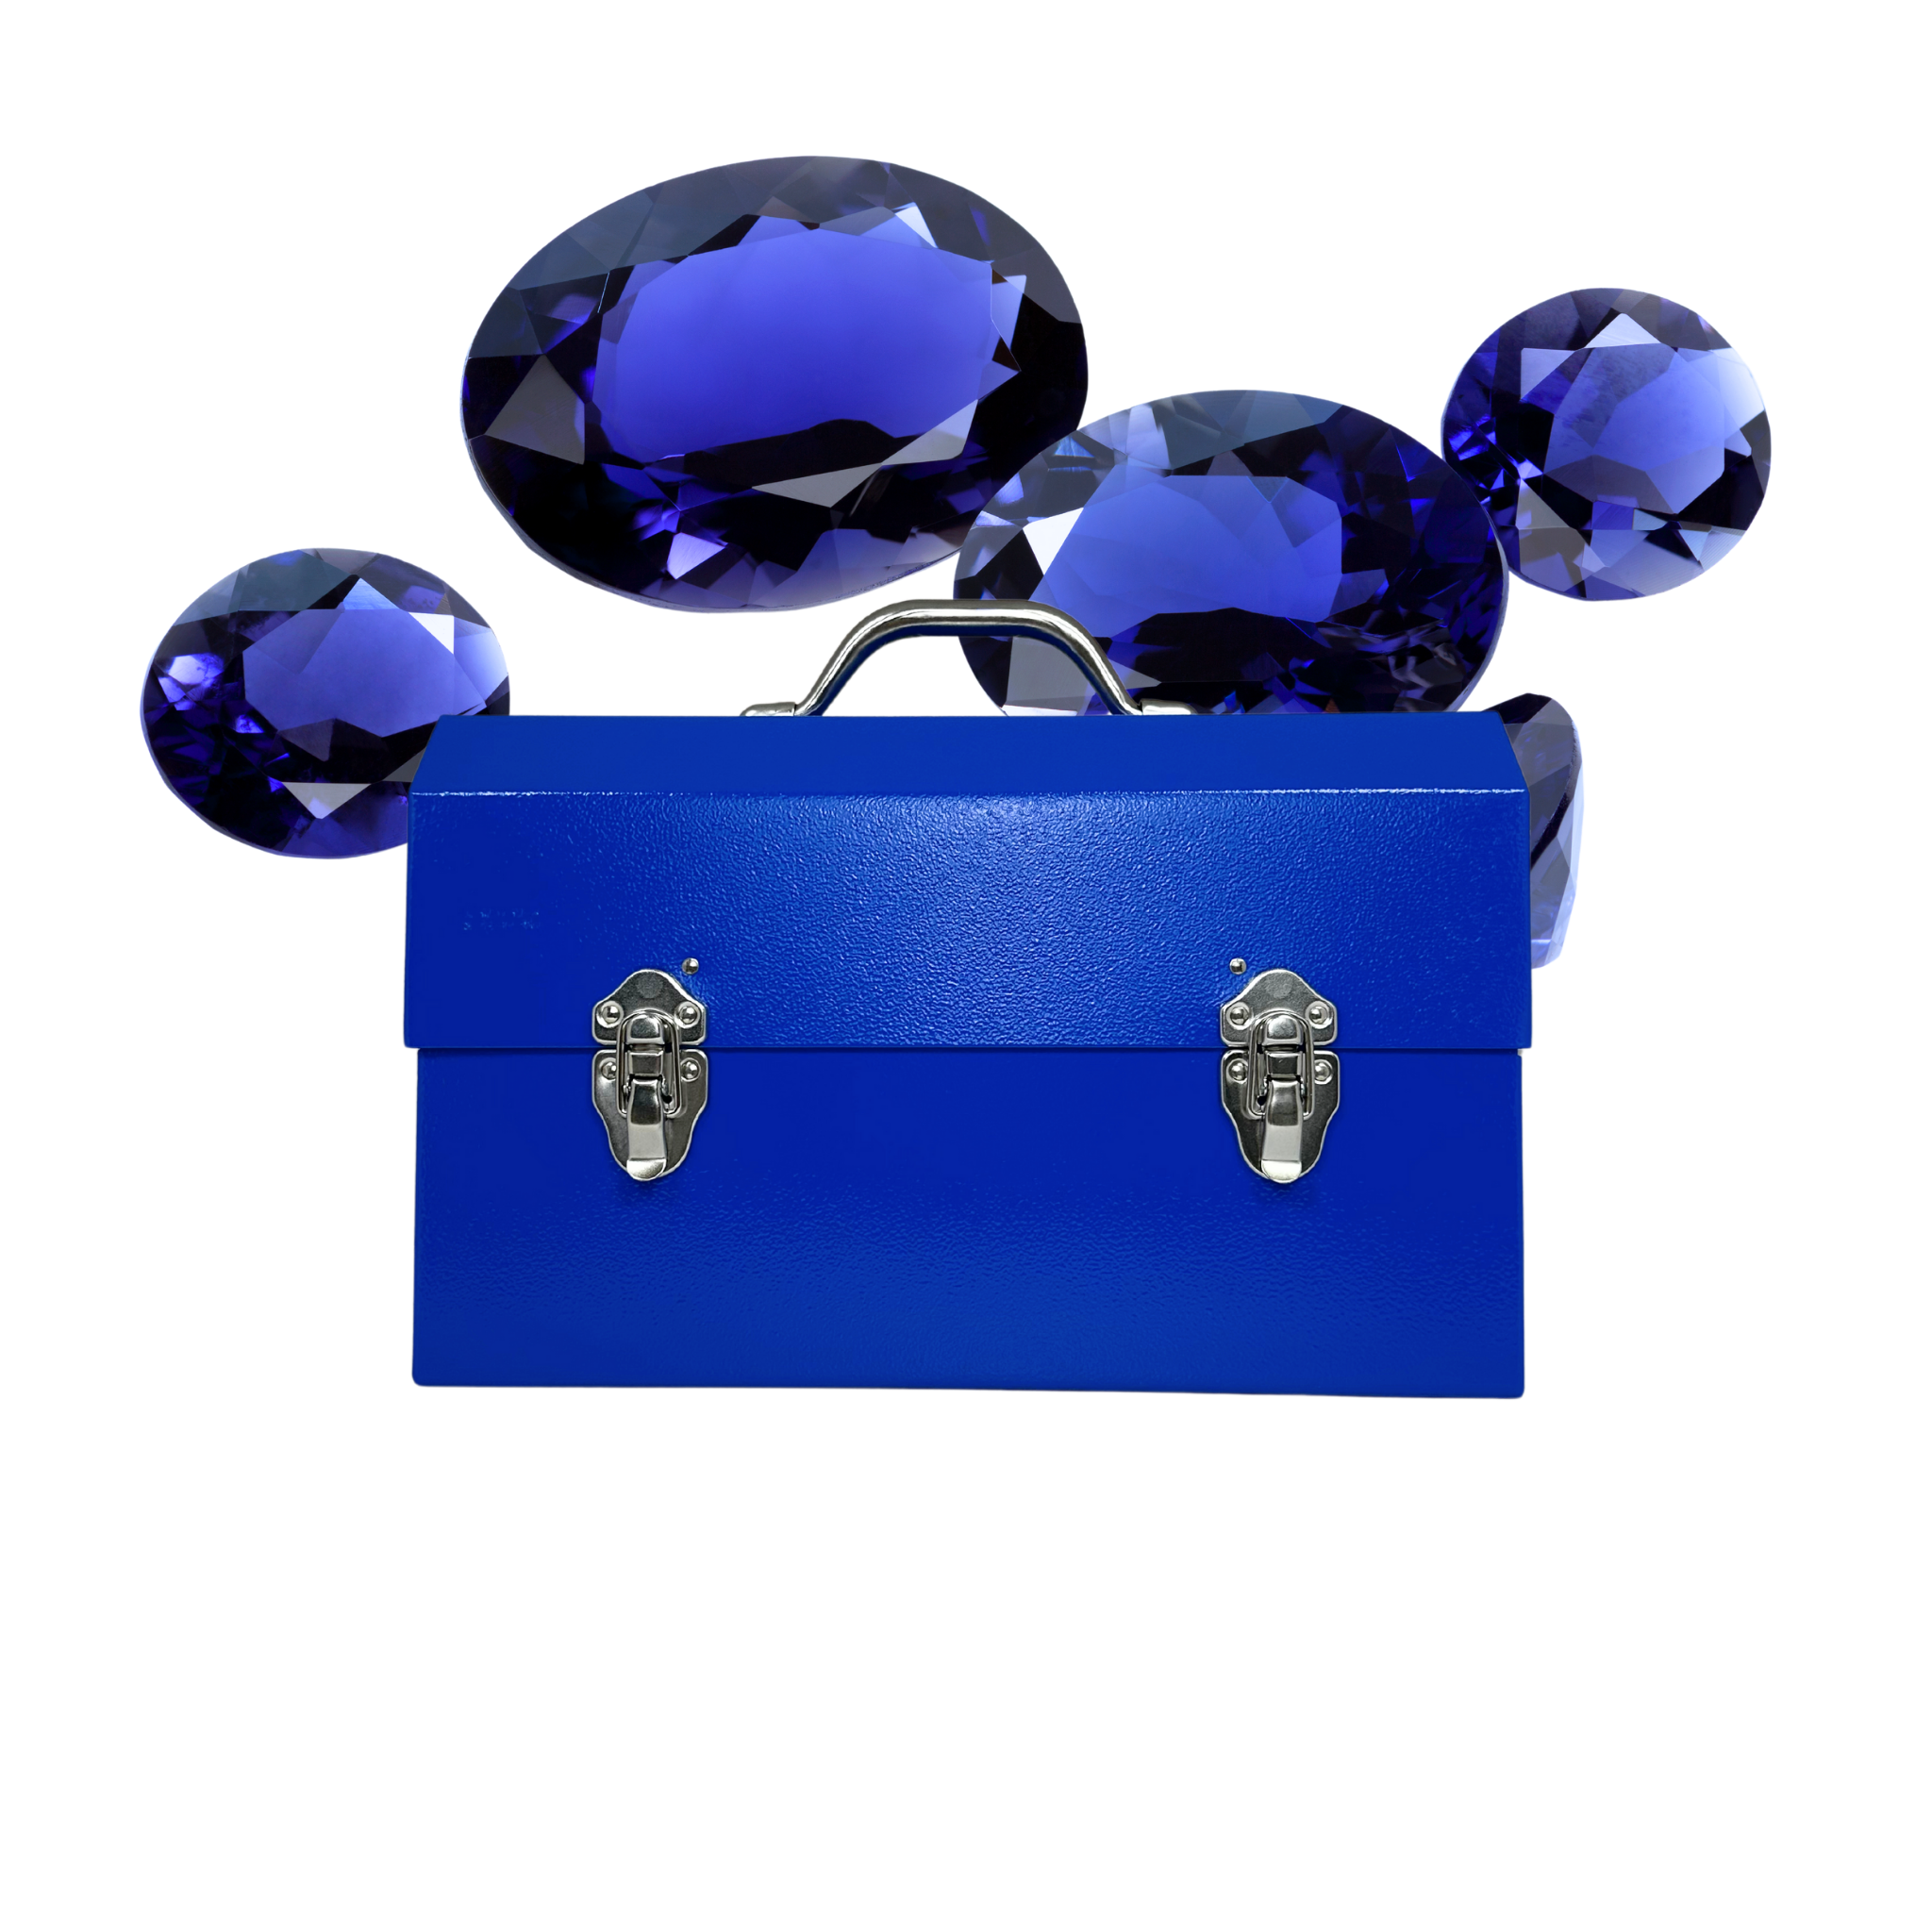 L. May aluminum lunchbox powder coated in hammered blue for the gemstone sapphire collection